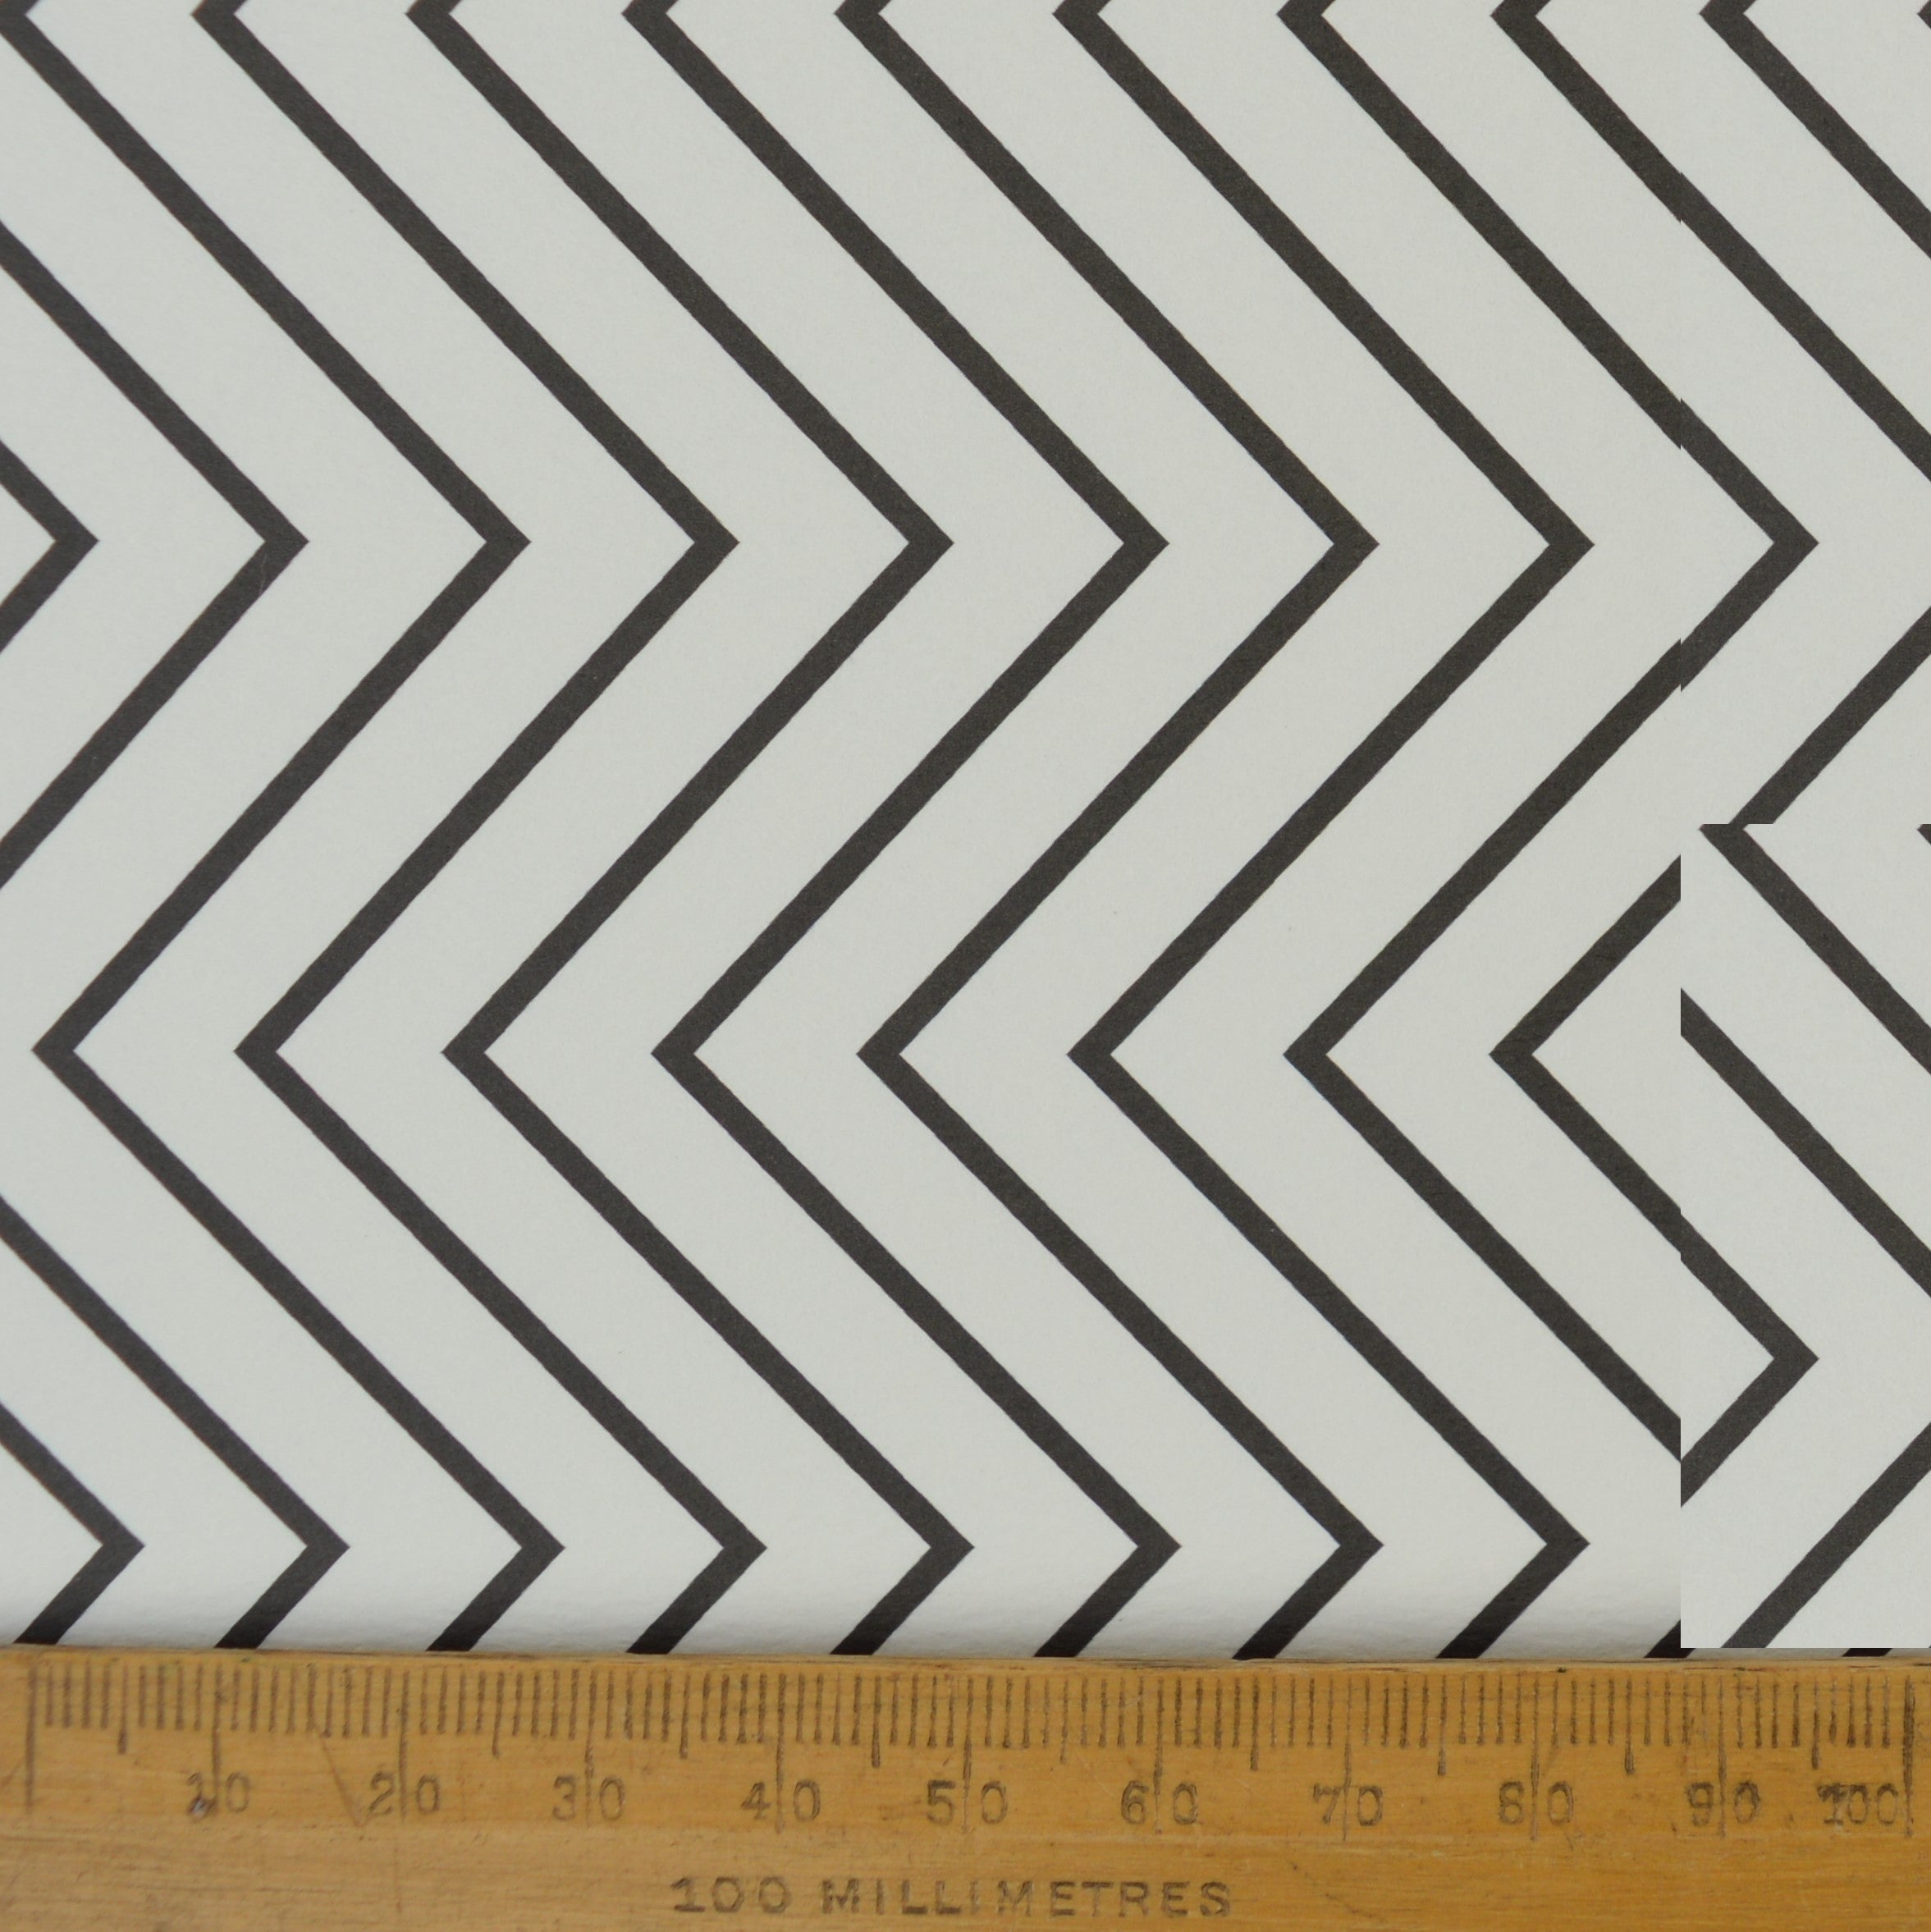 Munro and Kerr zig zag black and white monochrome paper for a lampshade